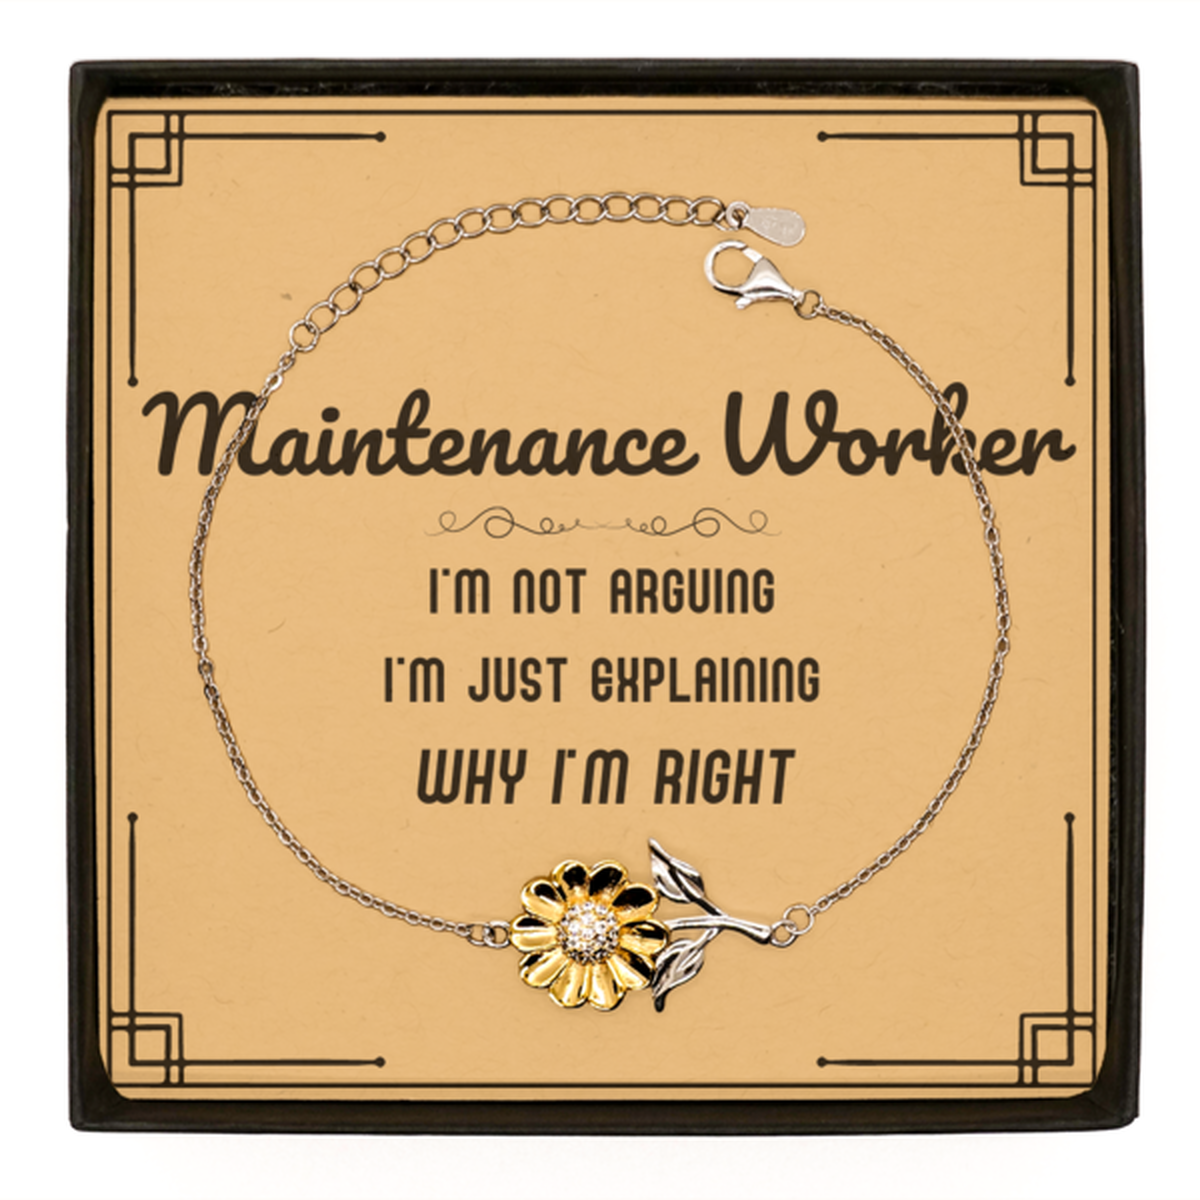 Maintenance Worker I'm not Arguing. I'm Just Explaining Why I'm RIGHT Sunflower Bracelet, Funny Saying Quote Maintenance Worker Gifts For Maintenance Worker Message Card Graduation Birthday Christmas Gifts for Men Women Coworker